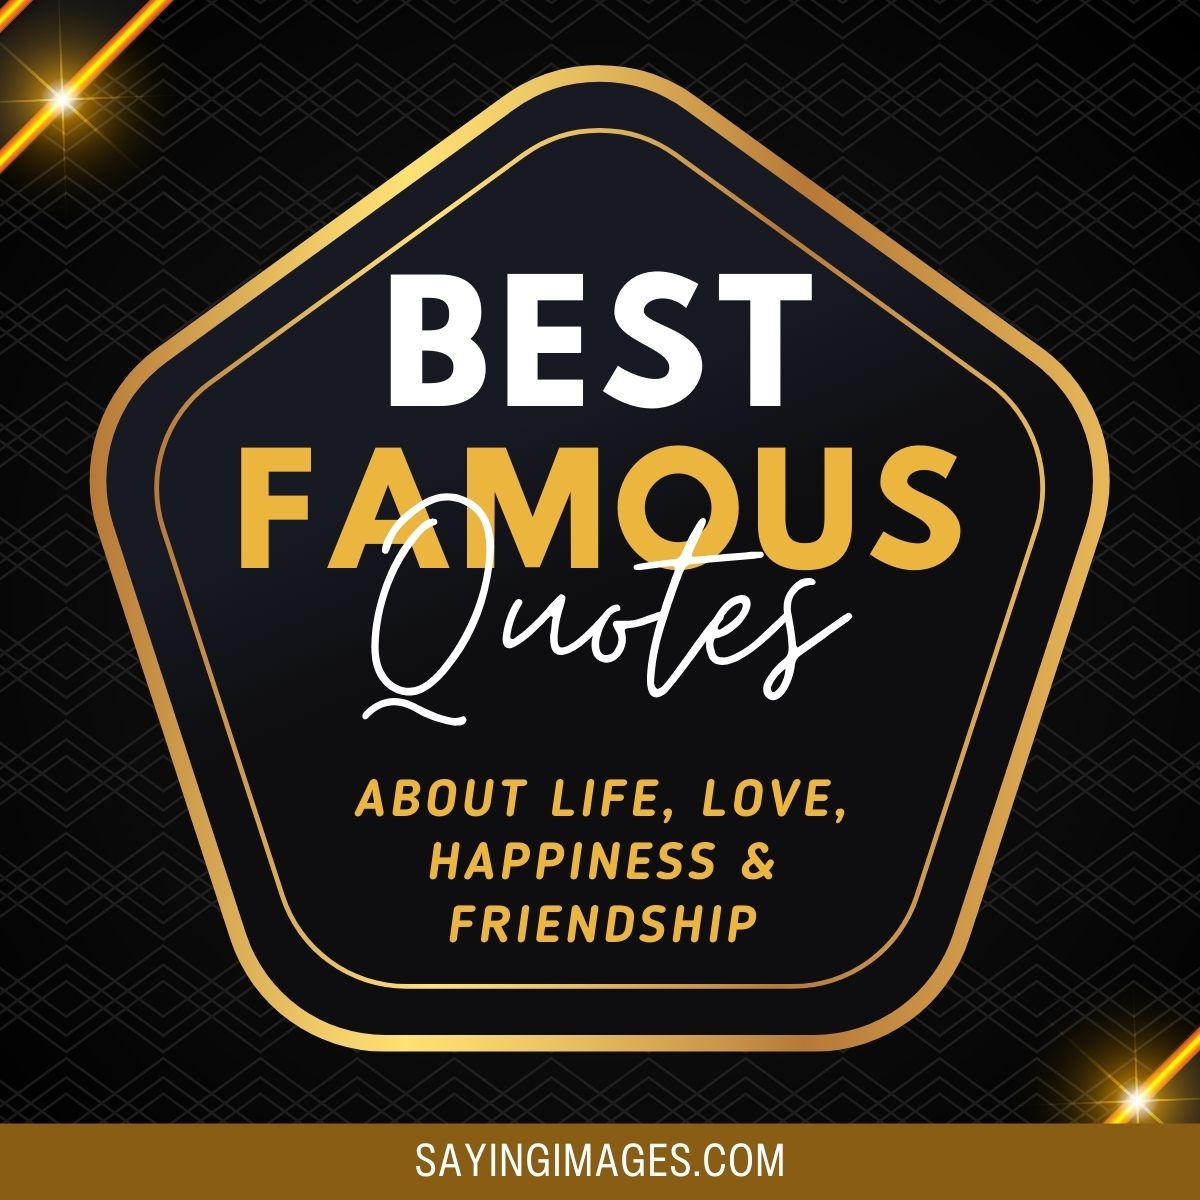 Most Famous Quotes About Life, Love, Happiness, and Friendship